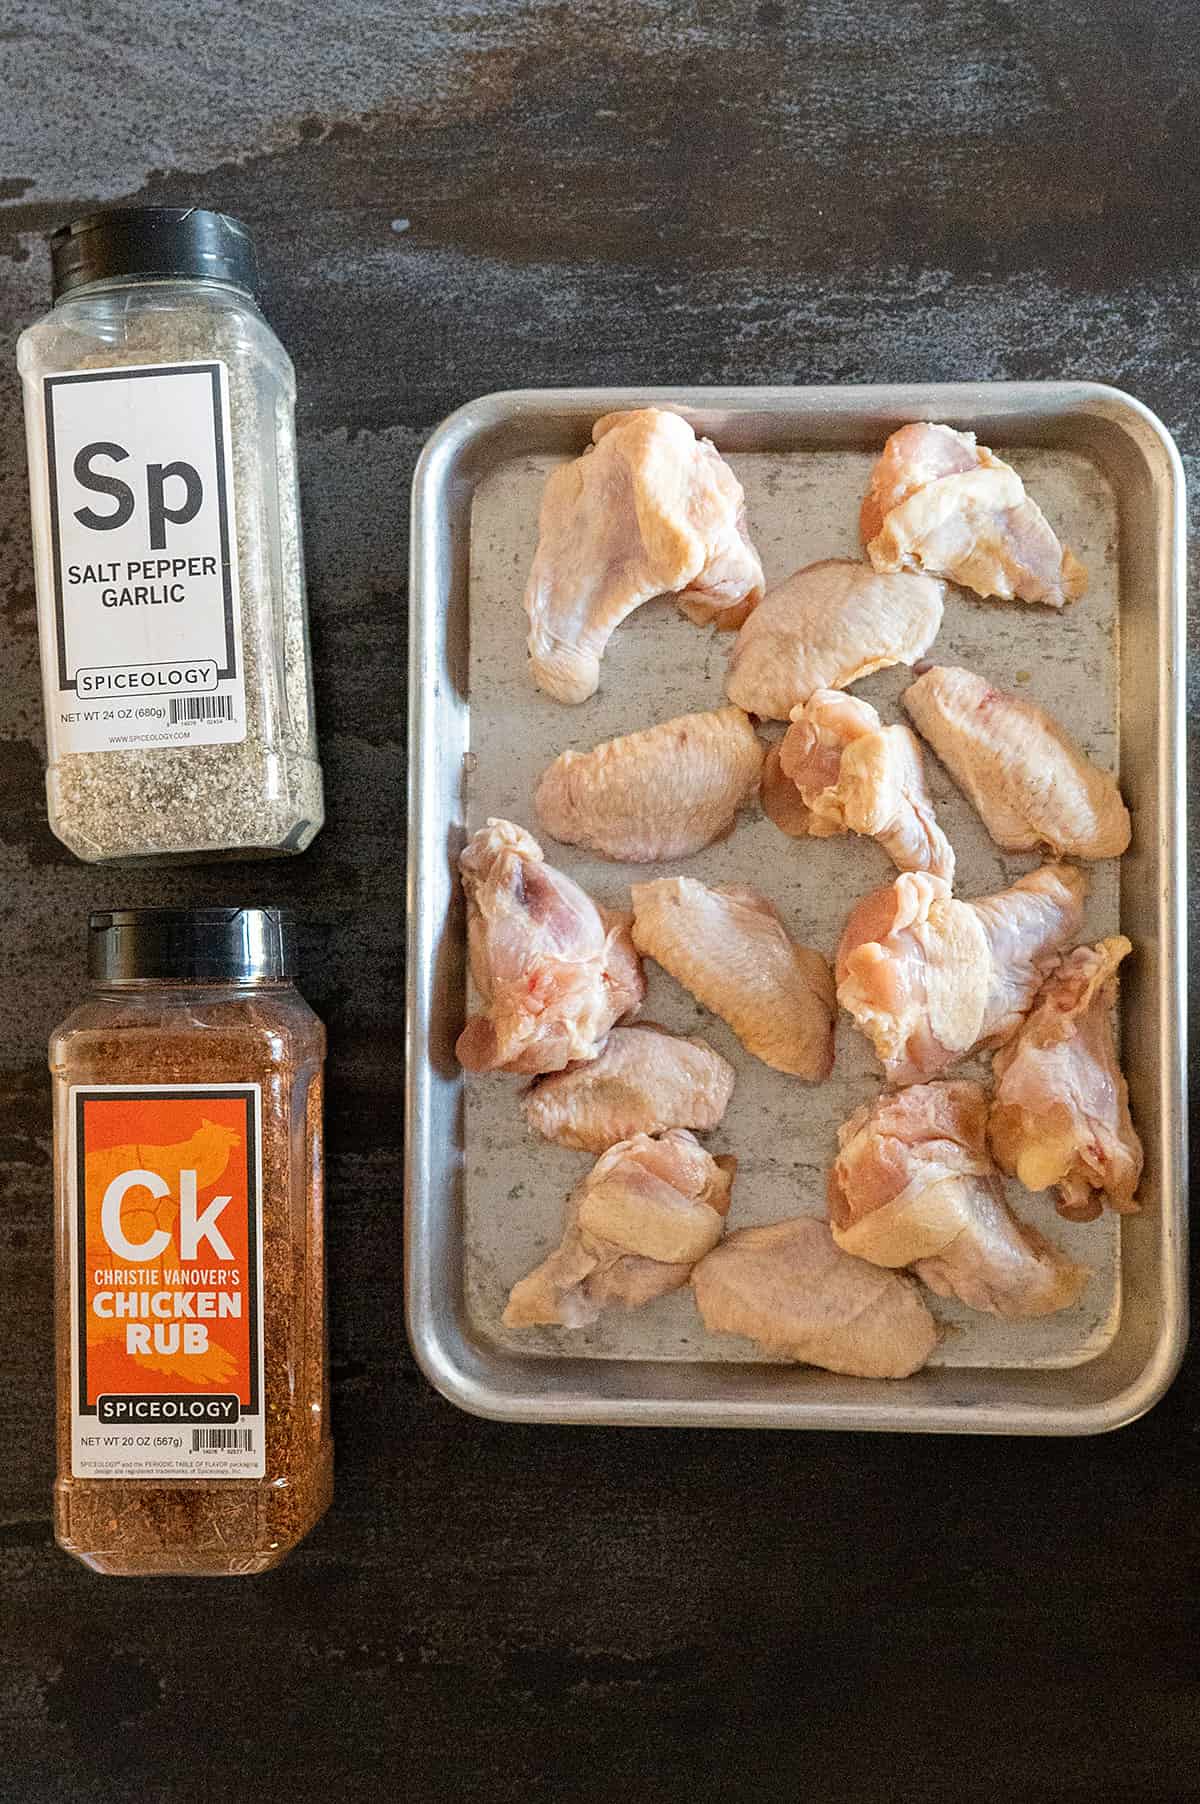 smoked chicken wings ingredients: chicken wings, SPG and chicken rub.